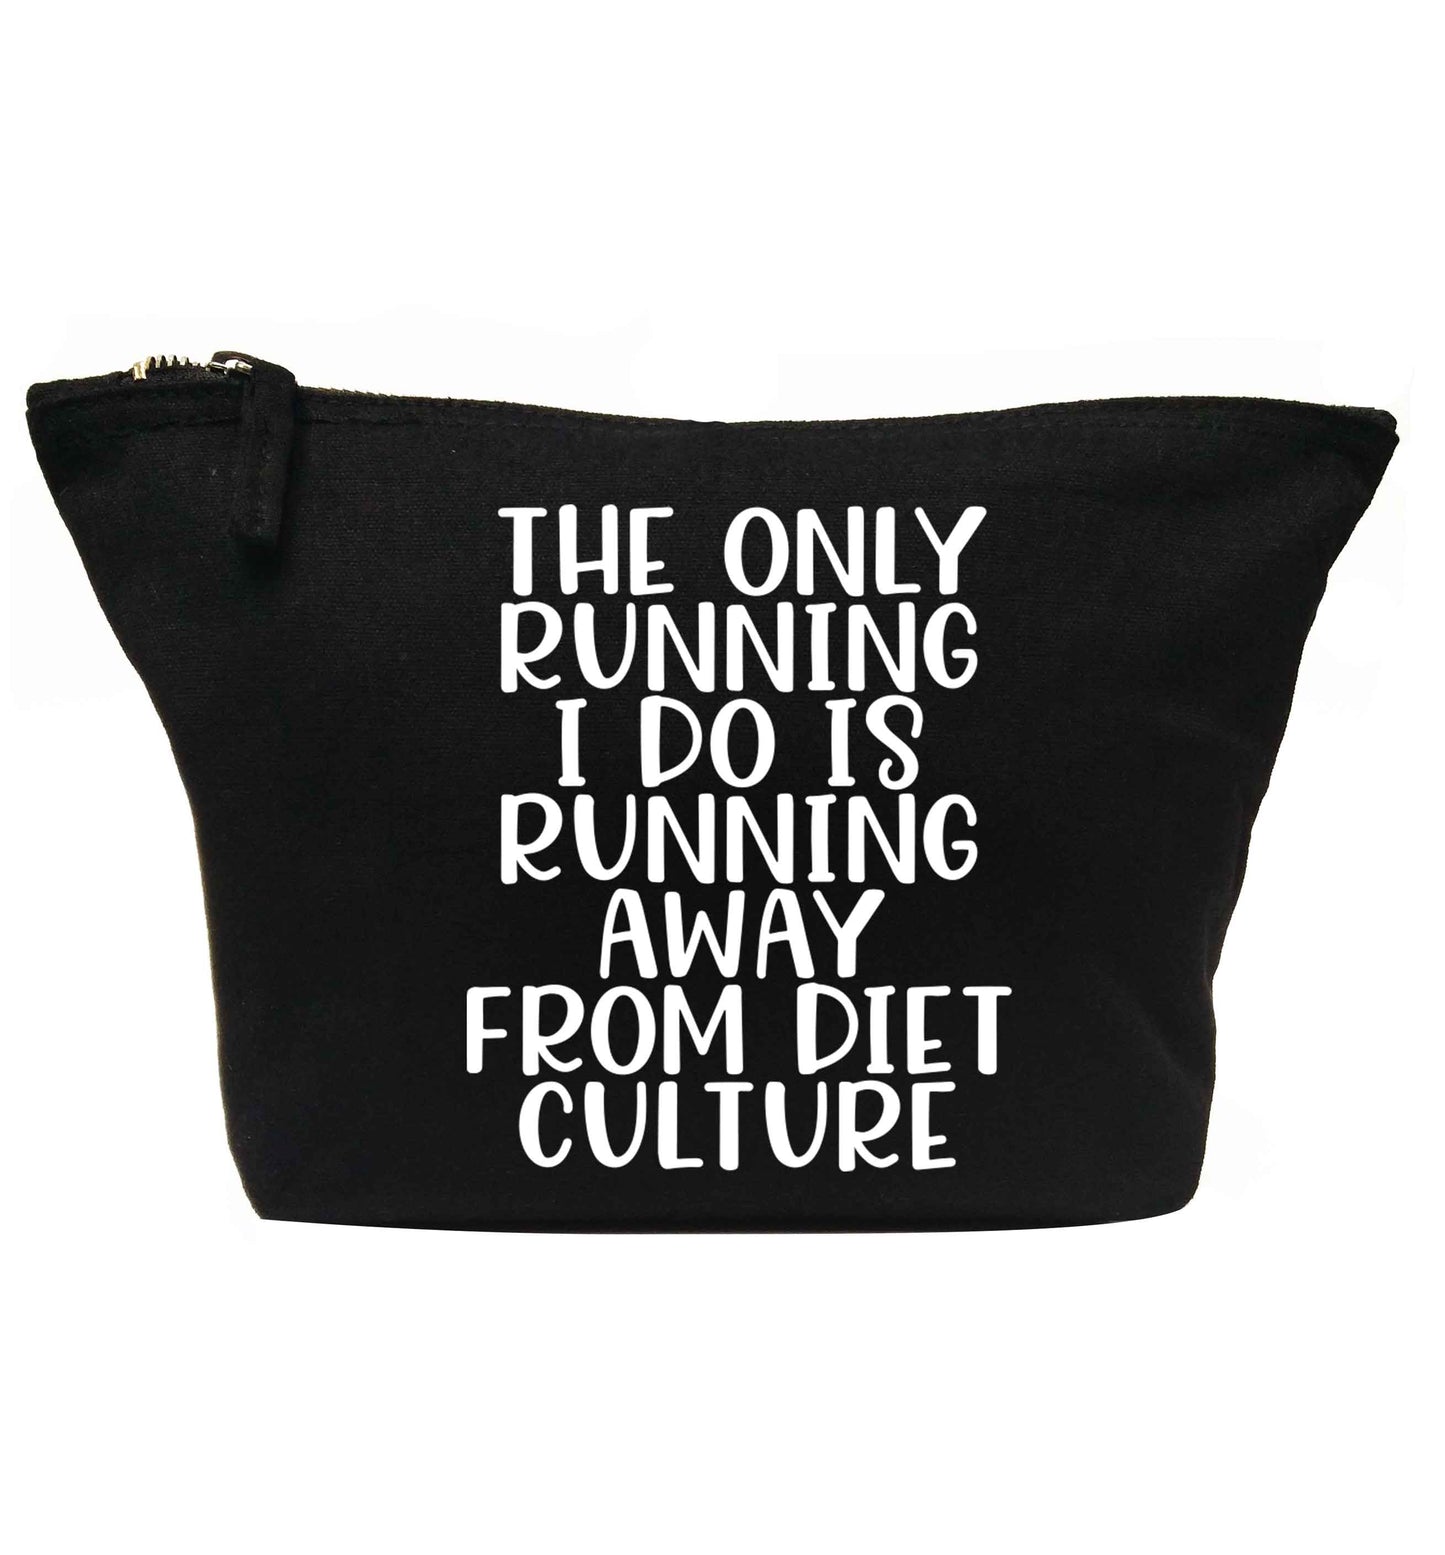 The only running I do is running away from diet culture | Makeup / wash bag